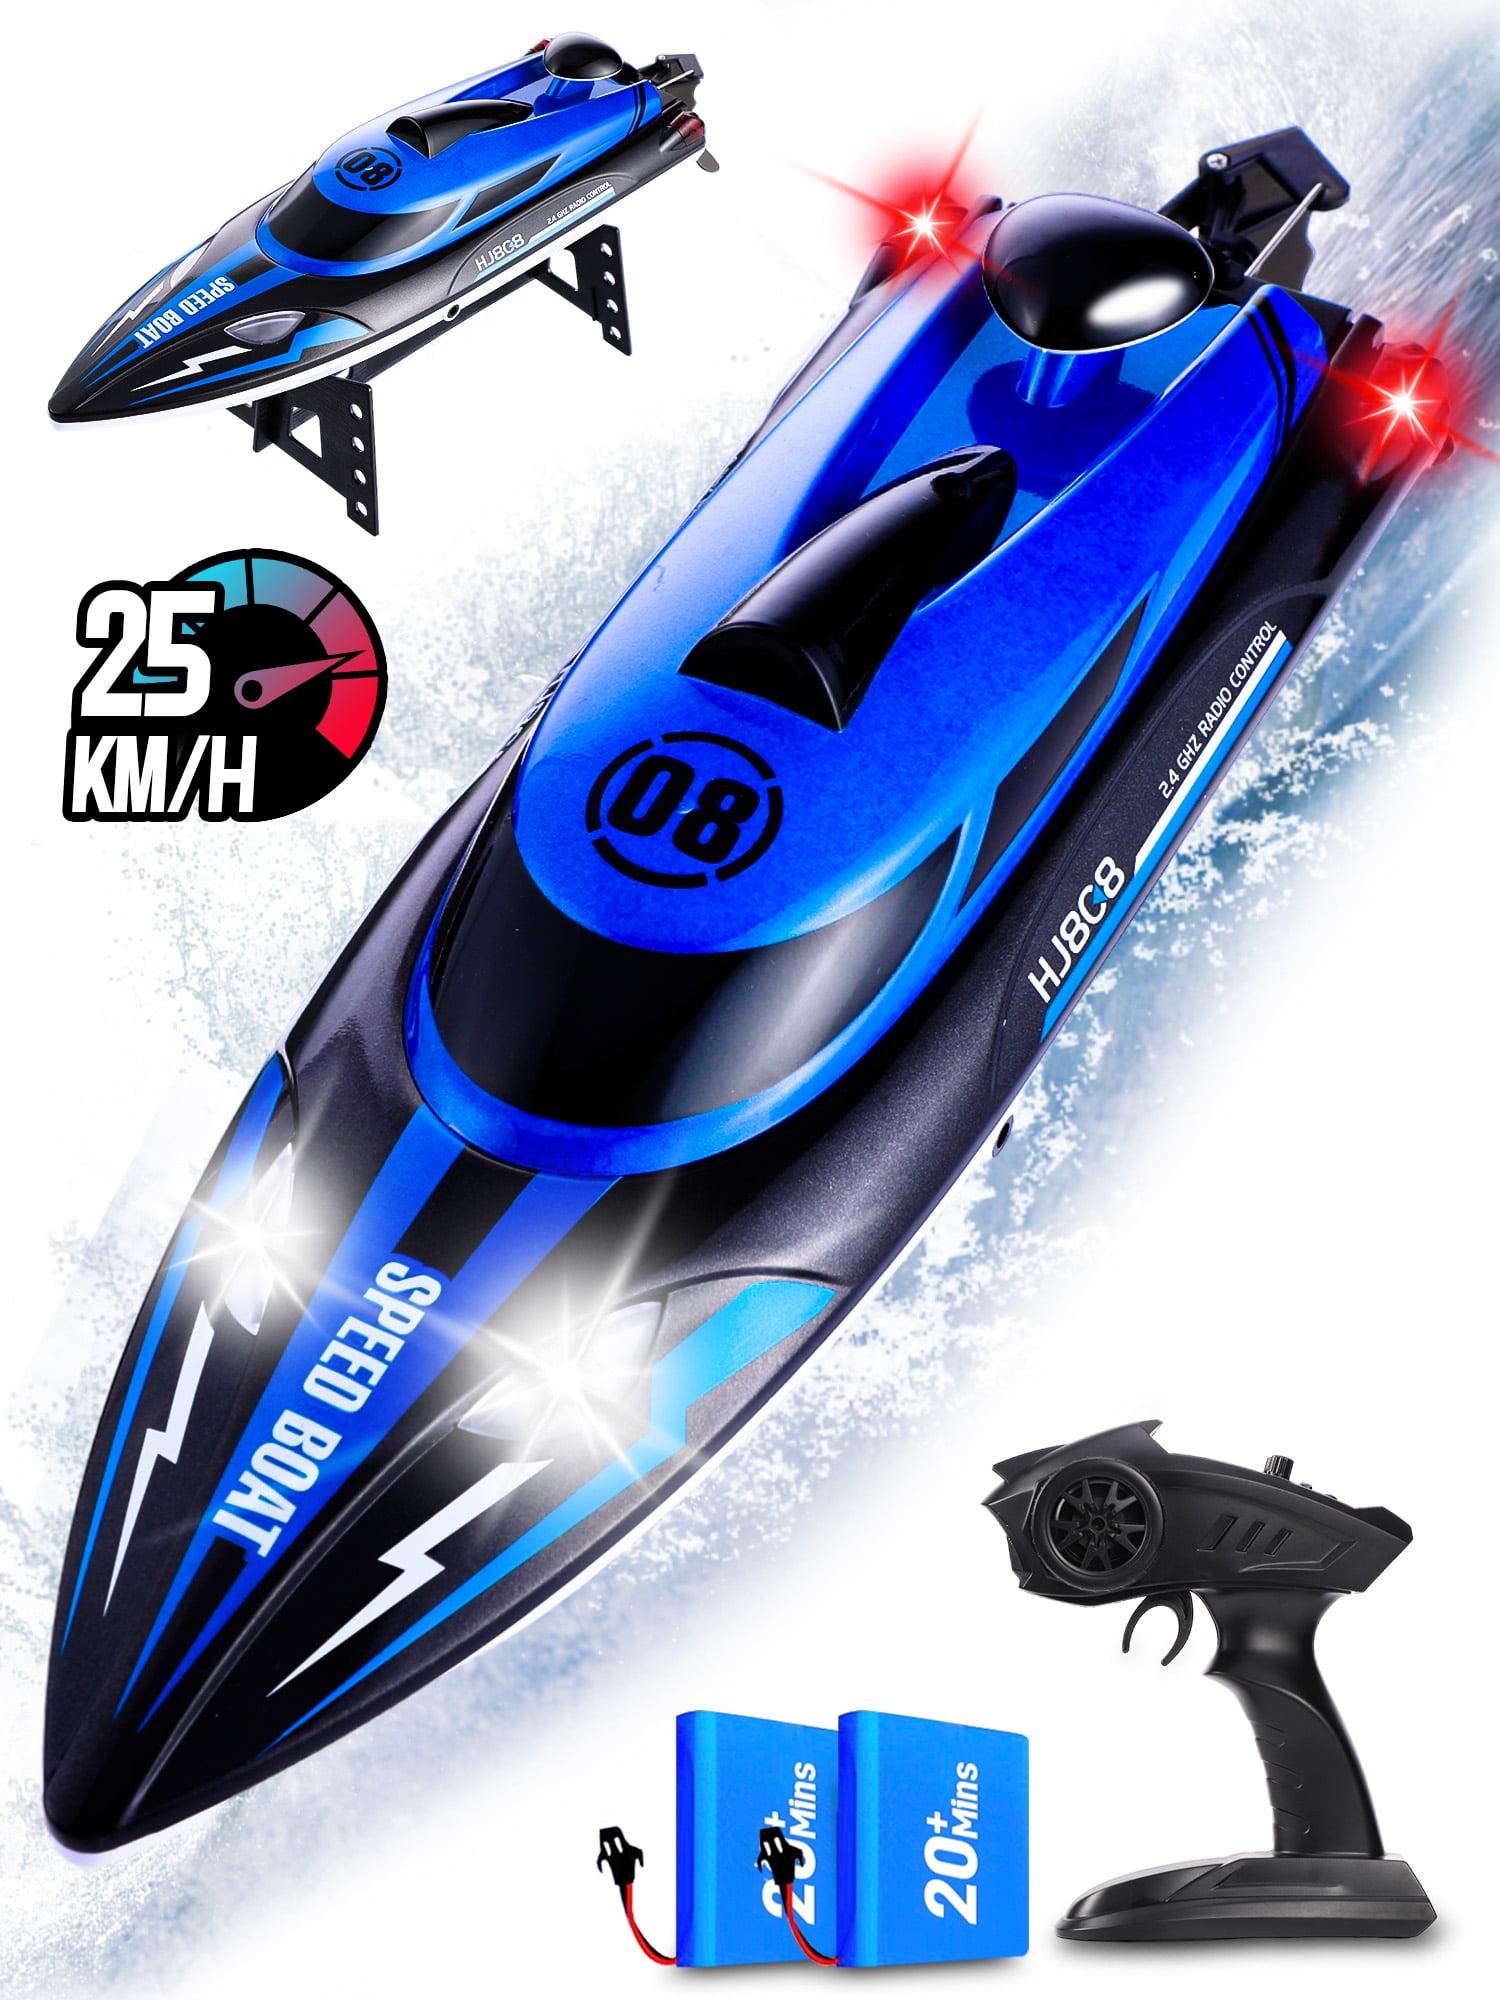 Monster Rc Boat: Different Options for Monster RC Boats